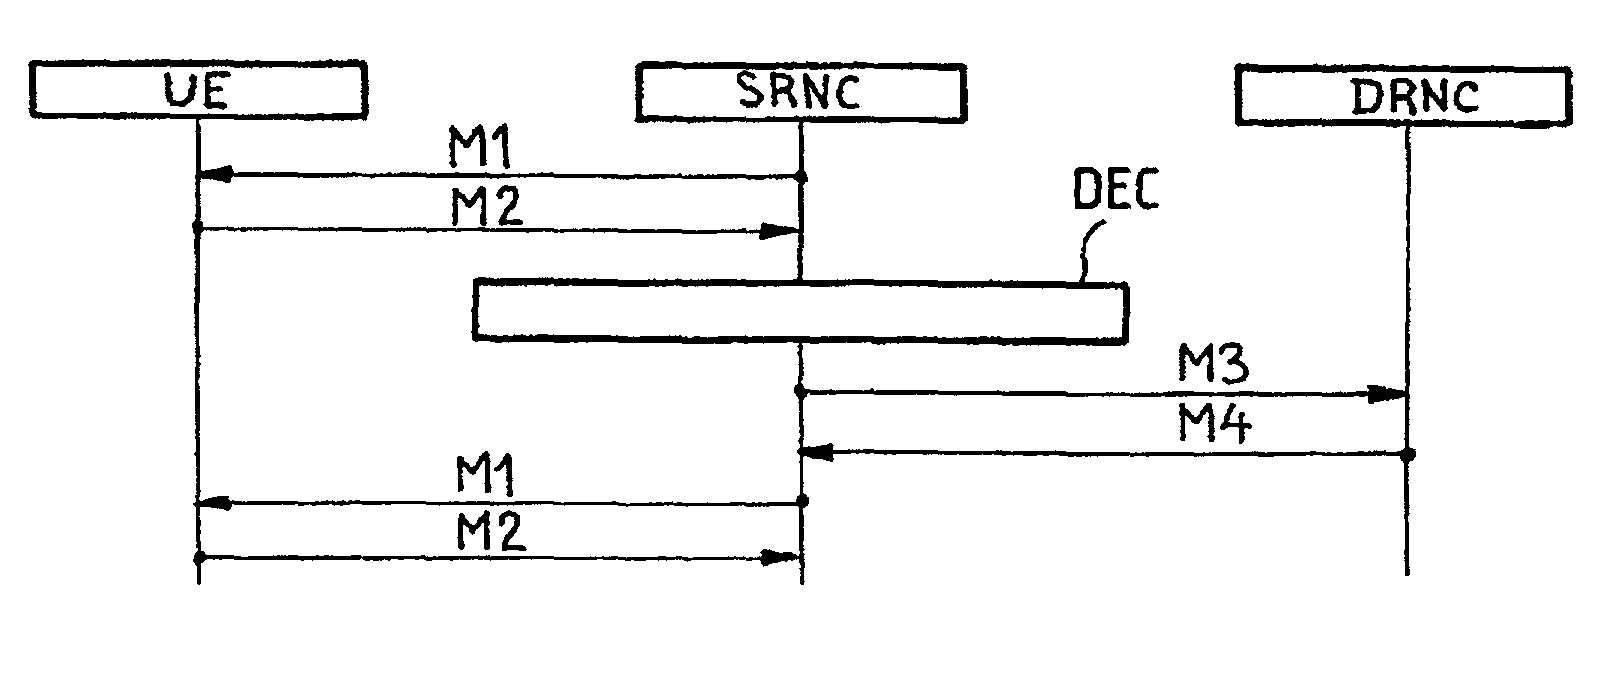 Intersystem call transfer method for use in cellular mobile radio systems